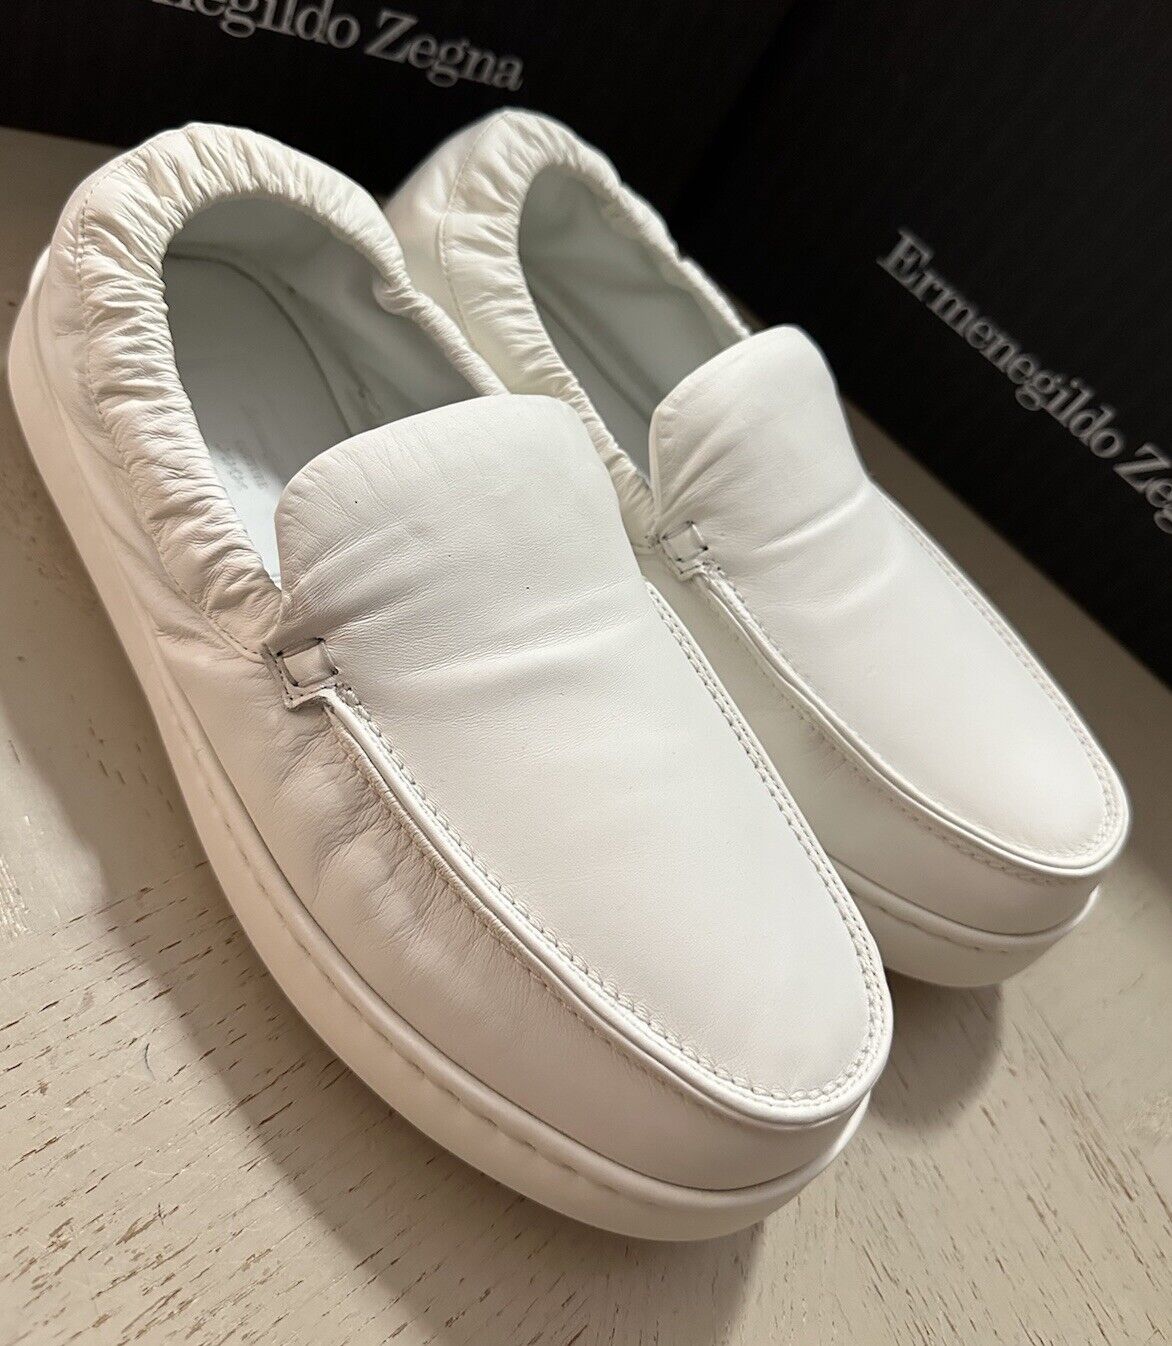 Ermenegildo Zegna Couture Leather Slippers Sneakers Shoes White 9 US New $860